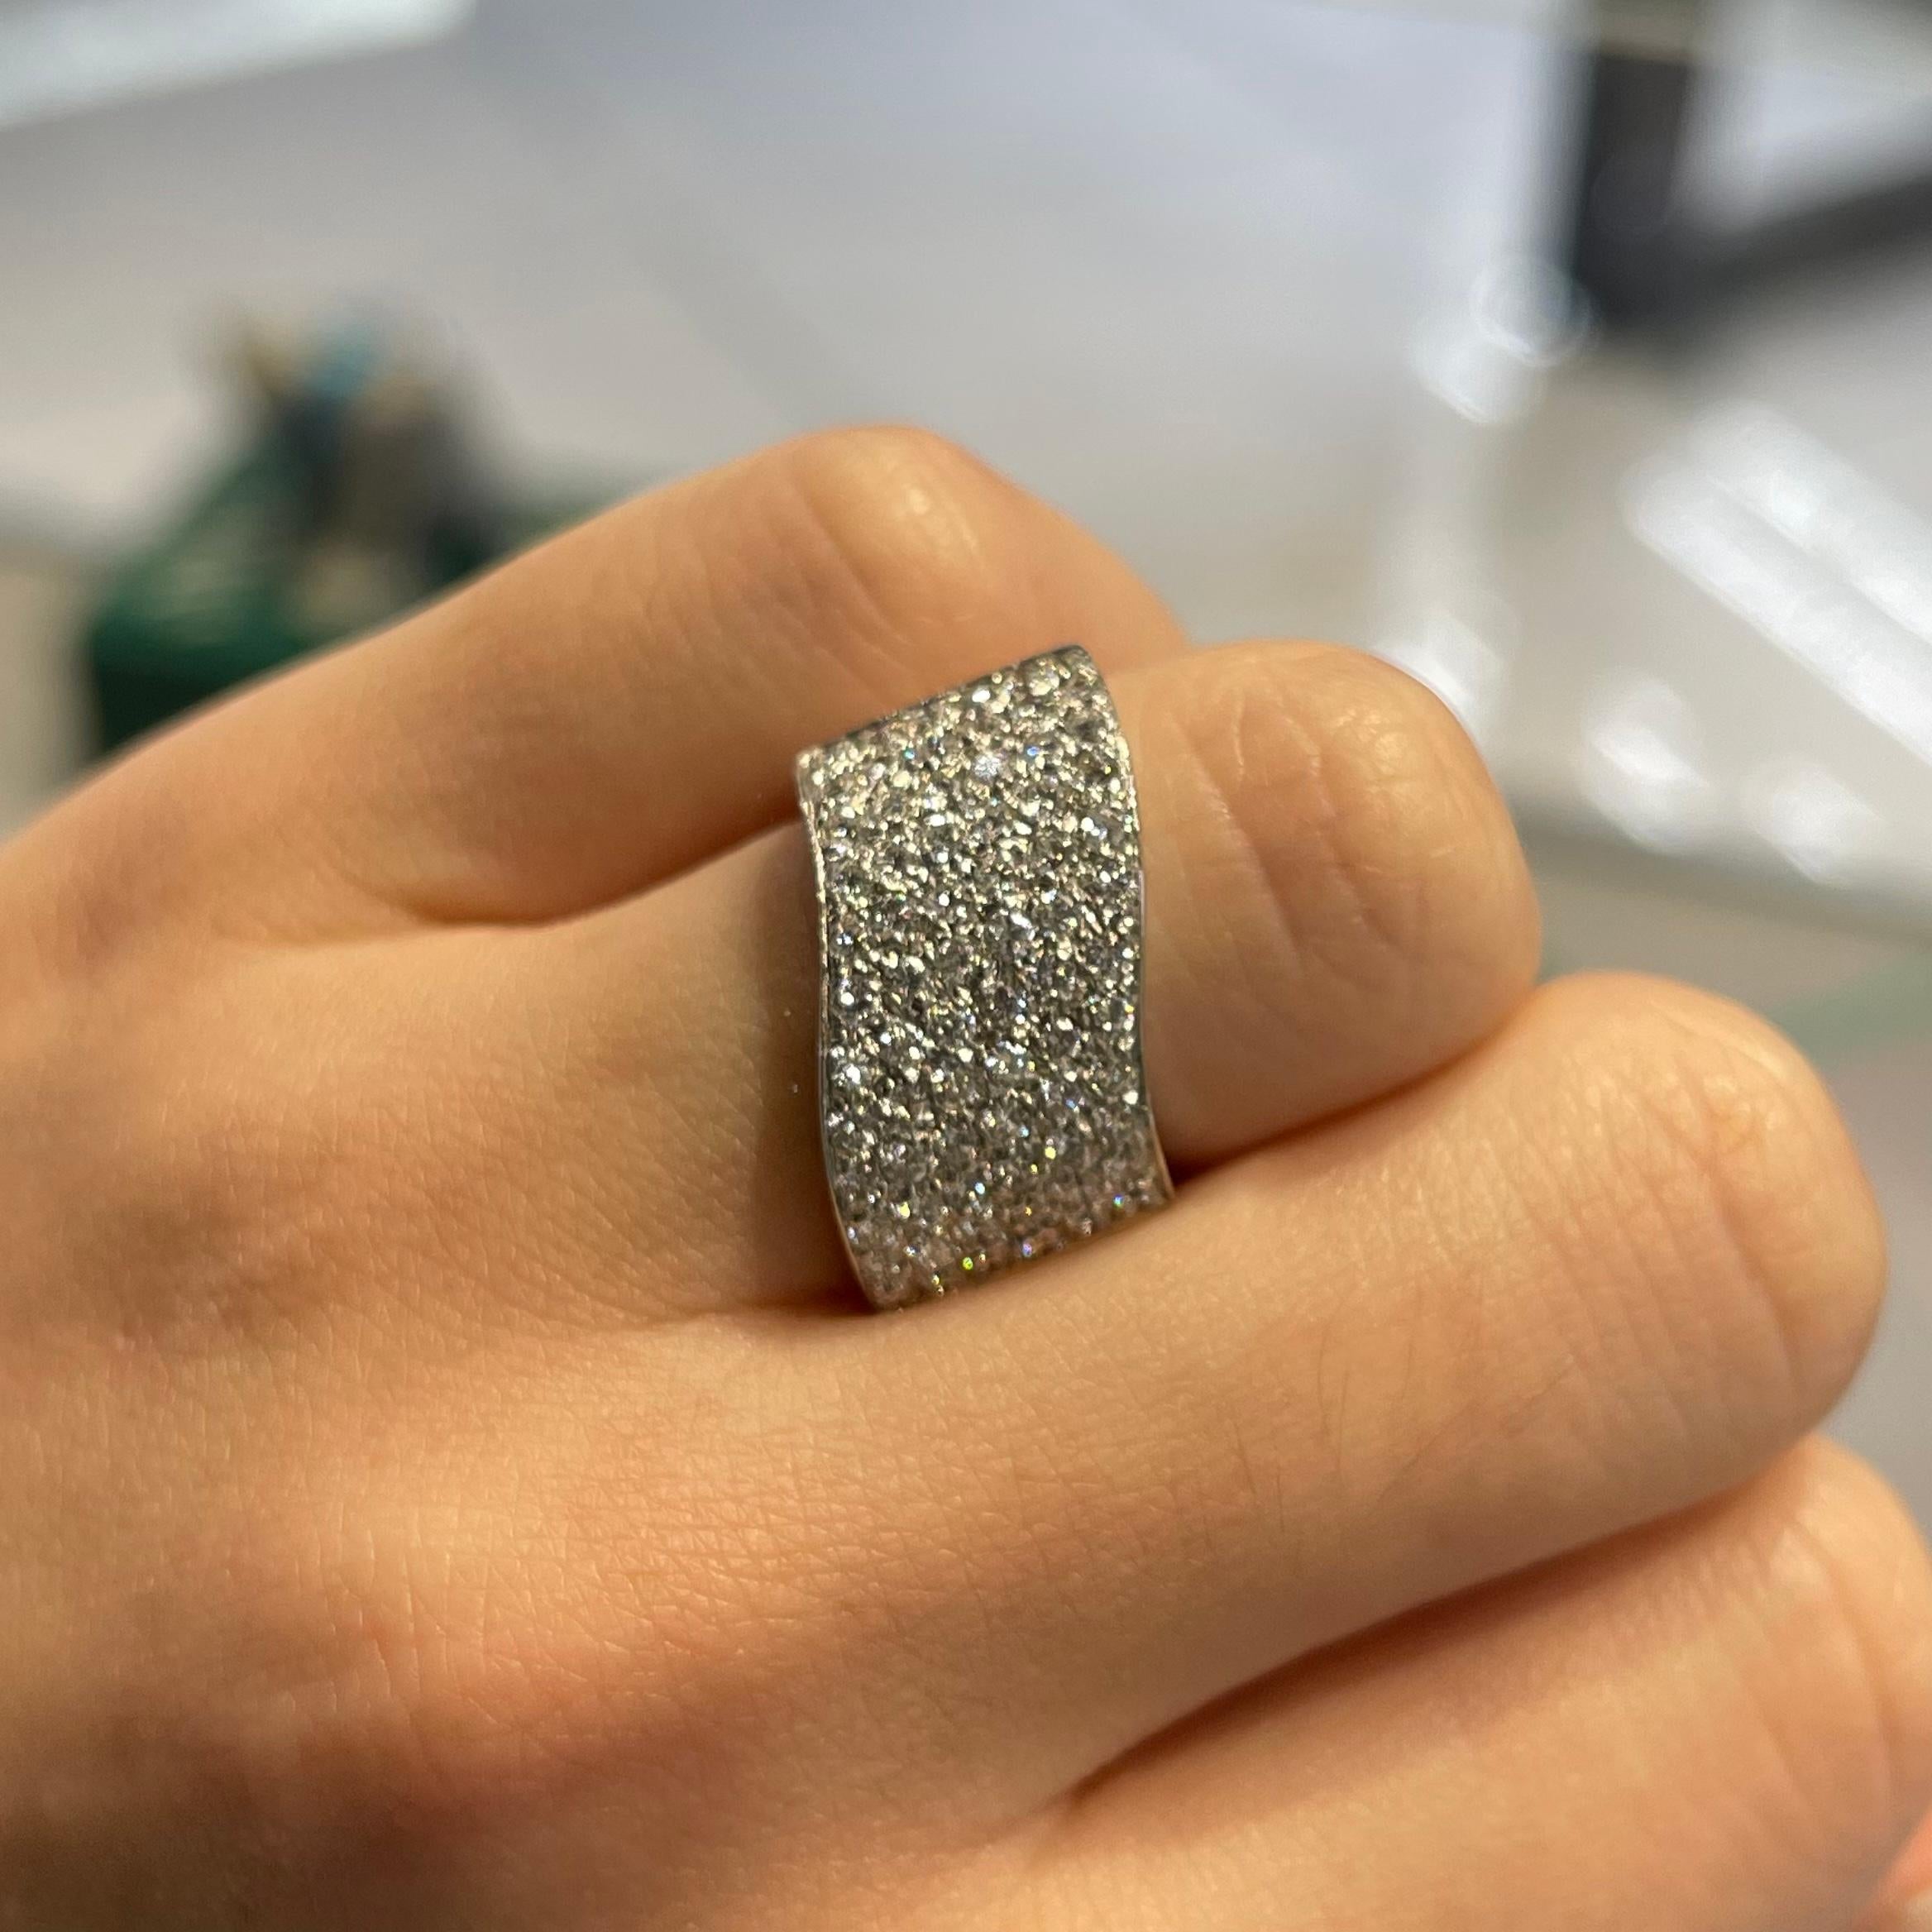 1.08 Carat Diamond Cocktail Ring in 18k White Gold 'Sizable' In Excellent Condition For Sale In Miami, FL